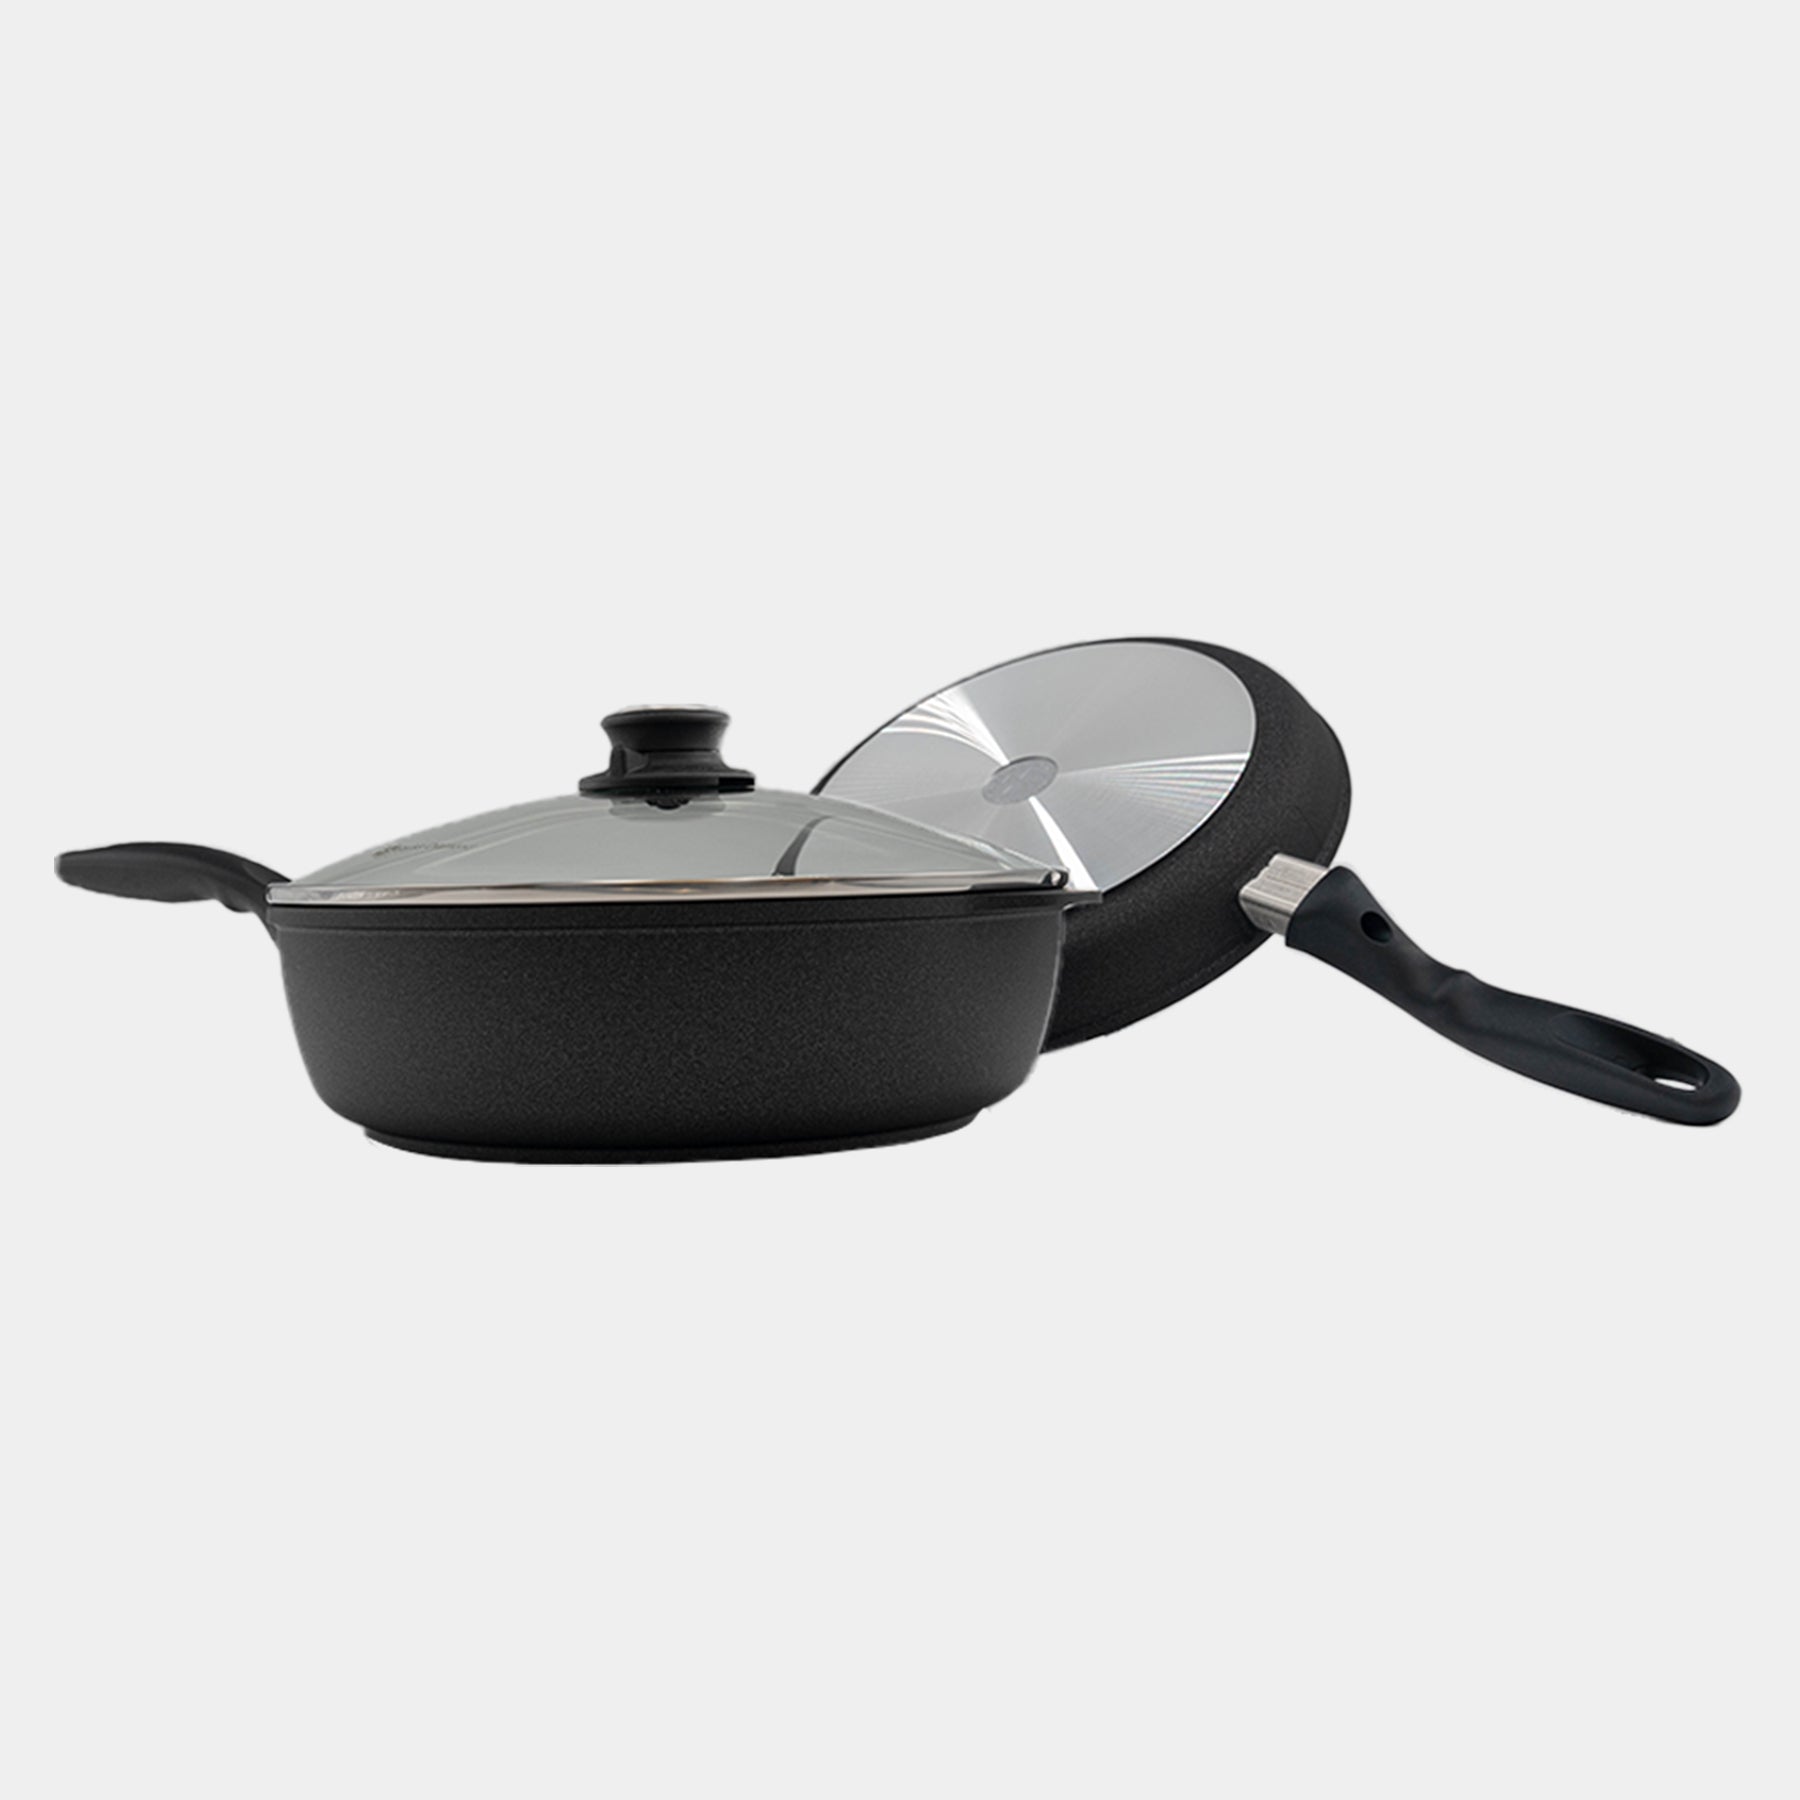 XD Nonstick 3-Piece Set - Fry Pan & Saute Pan side and bottom view